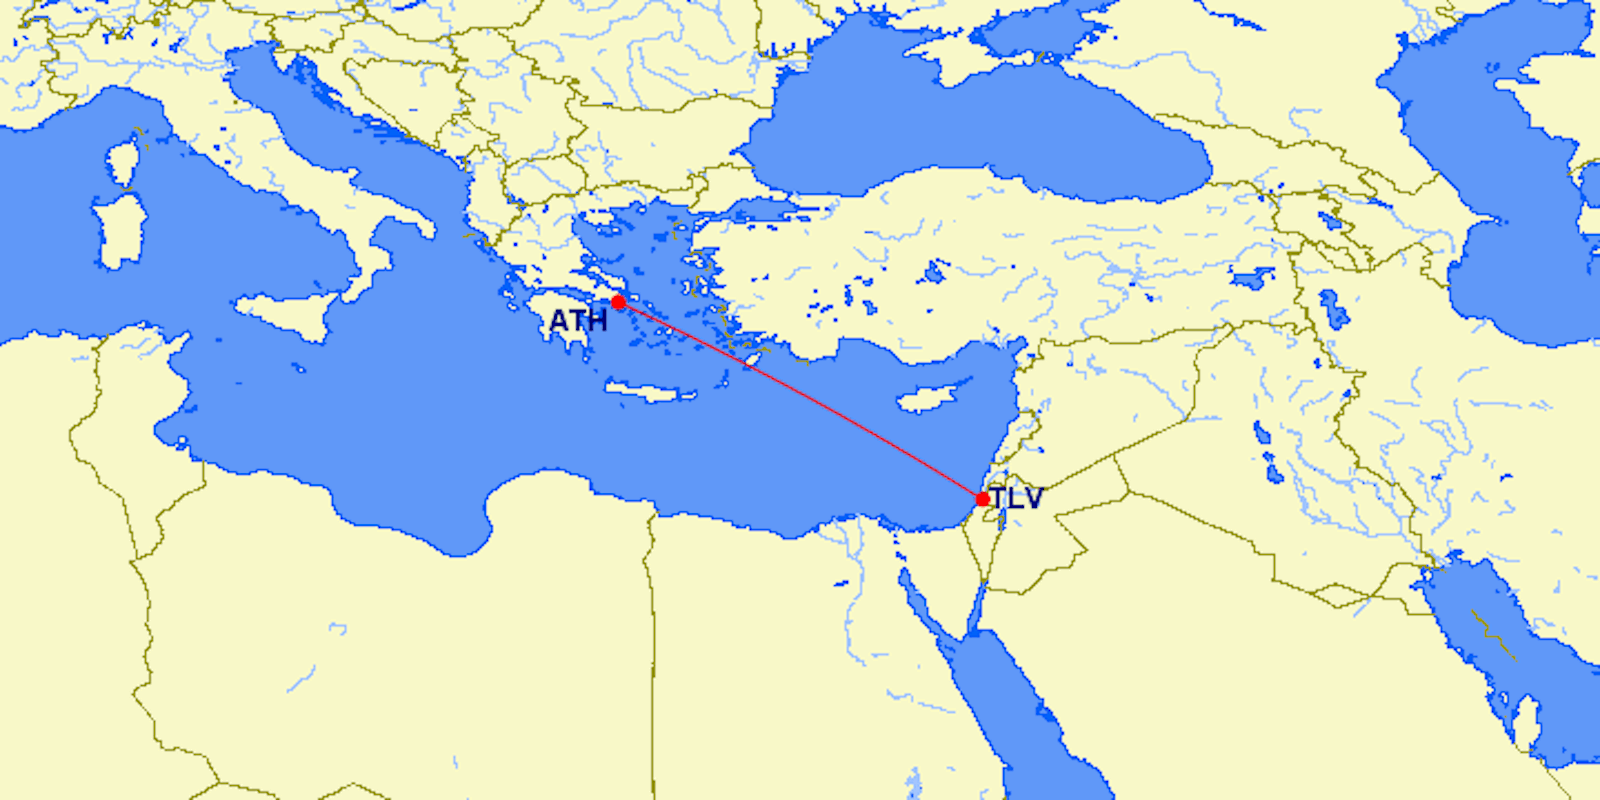 Athens to Tel Aviv is fifth freedom but not United 8k award